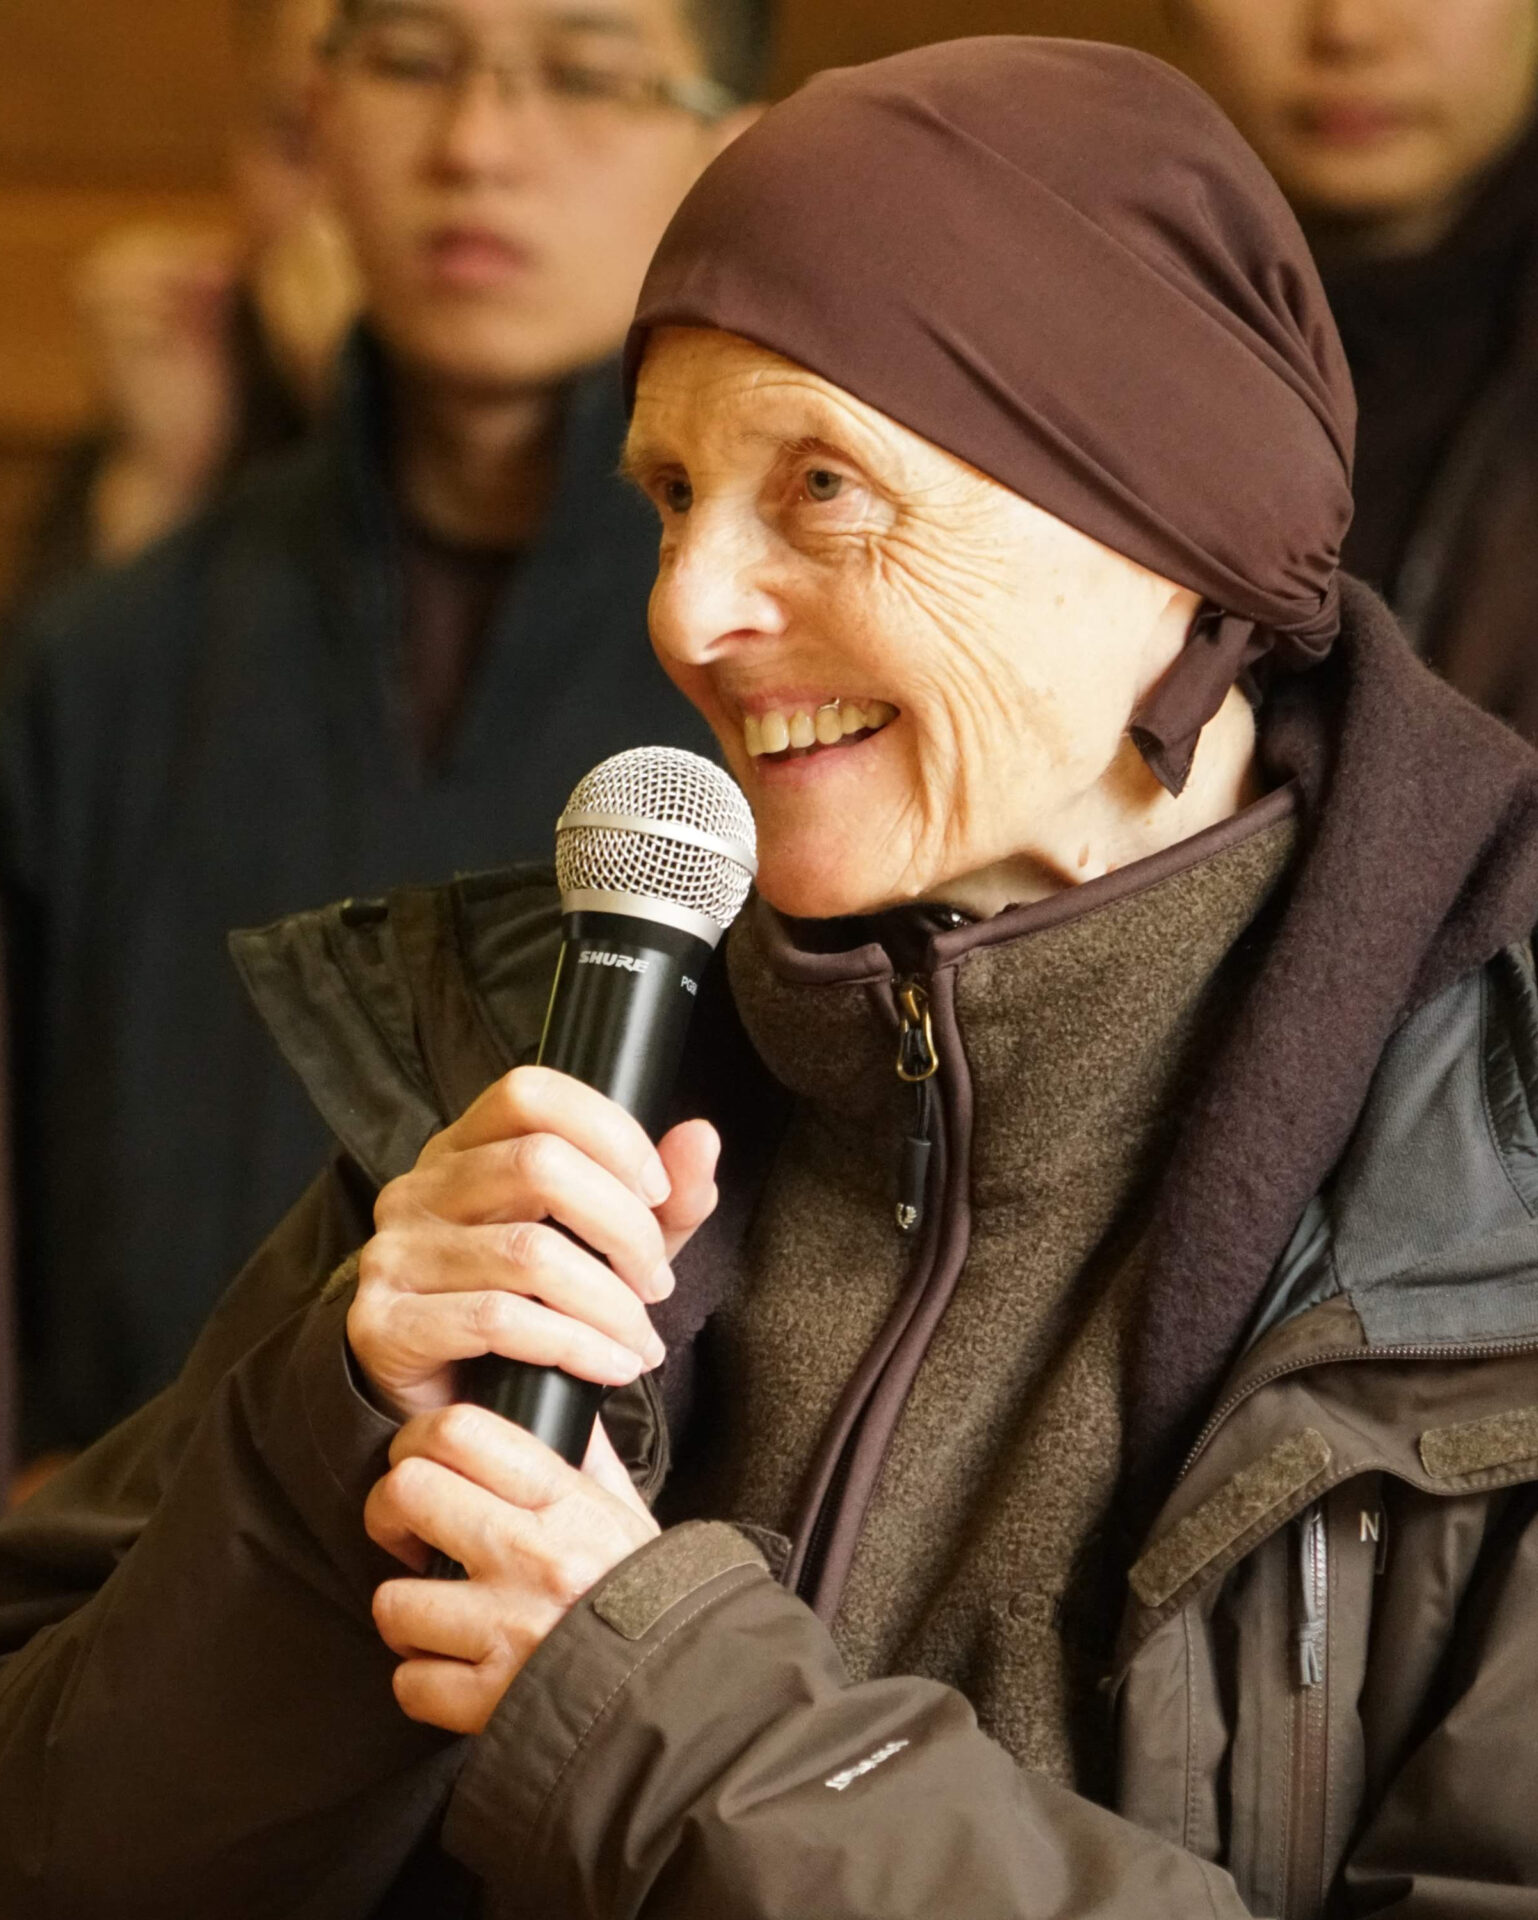 Sister Chan Duc is smiling and speaking into a microphone